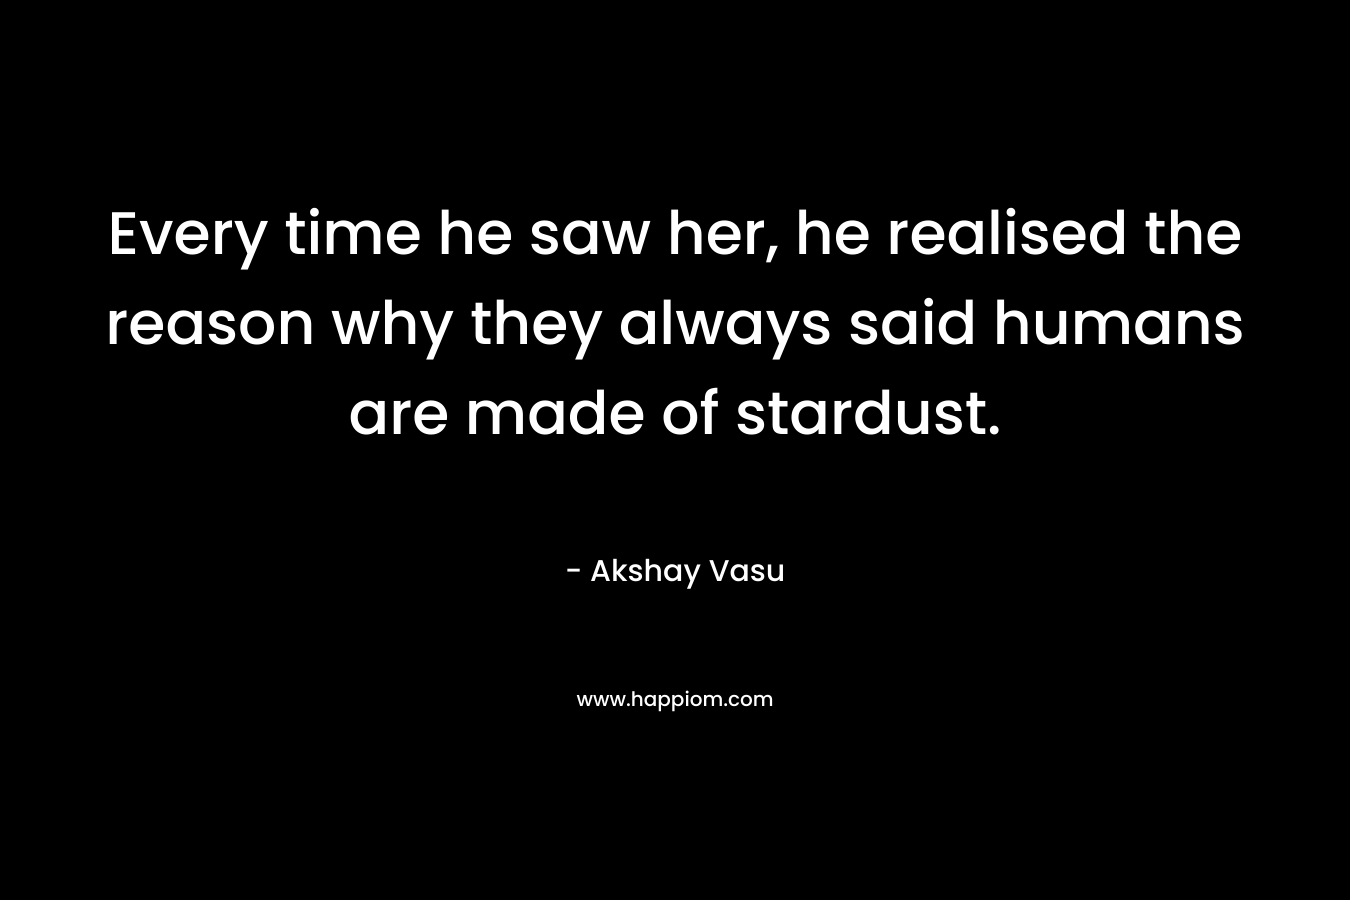 Every time he saw her, he realised the reason why they always said humans are made of stardust. – Akshay Vasu